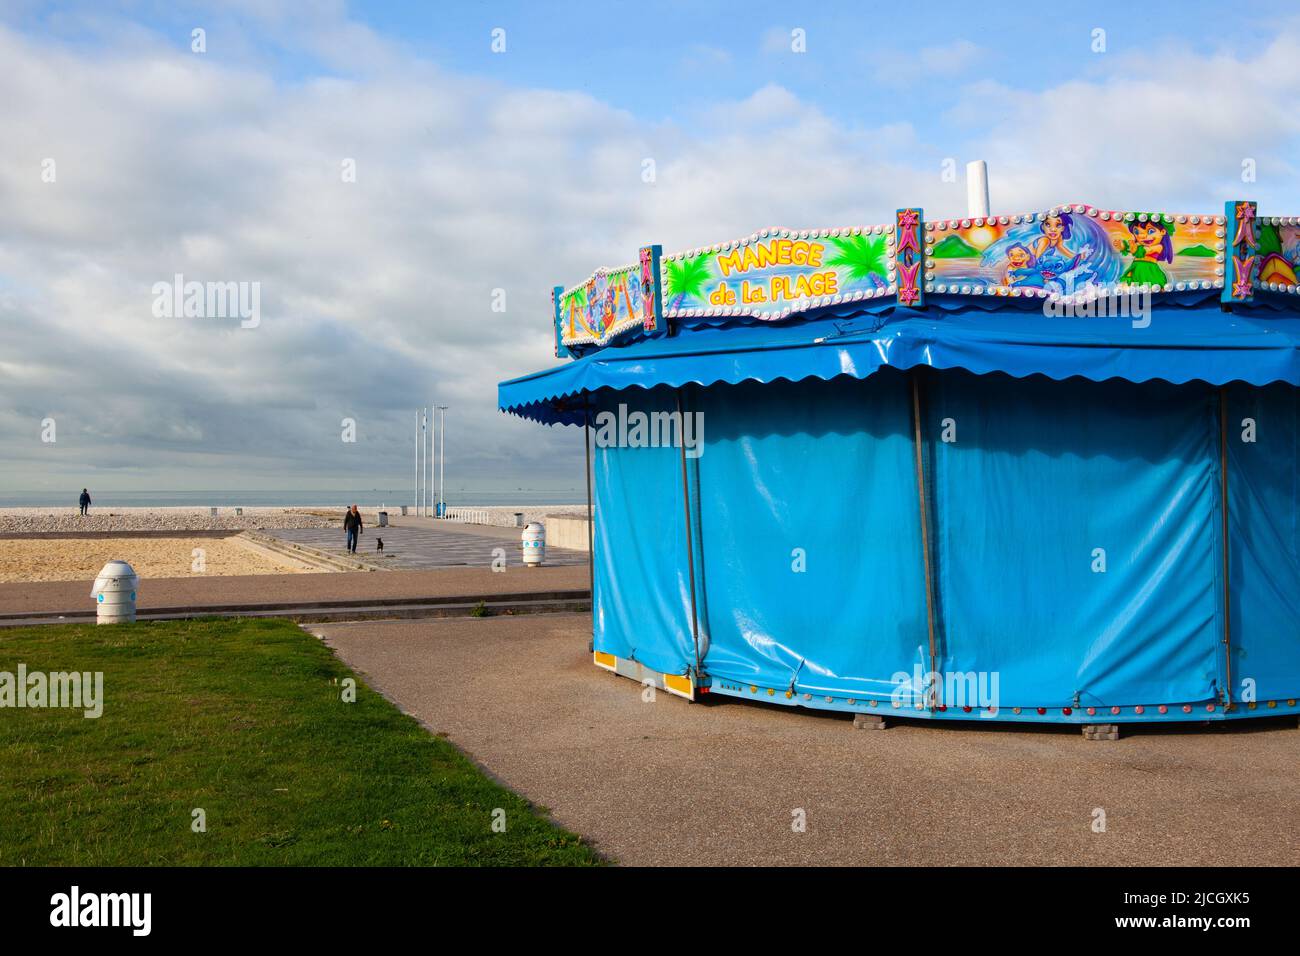 Le Havre,France - 13 October, 2021: Carousel for Kids on the empty beach in Le Havre. End of Season. Stock Photo